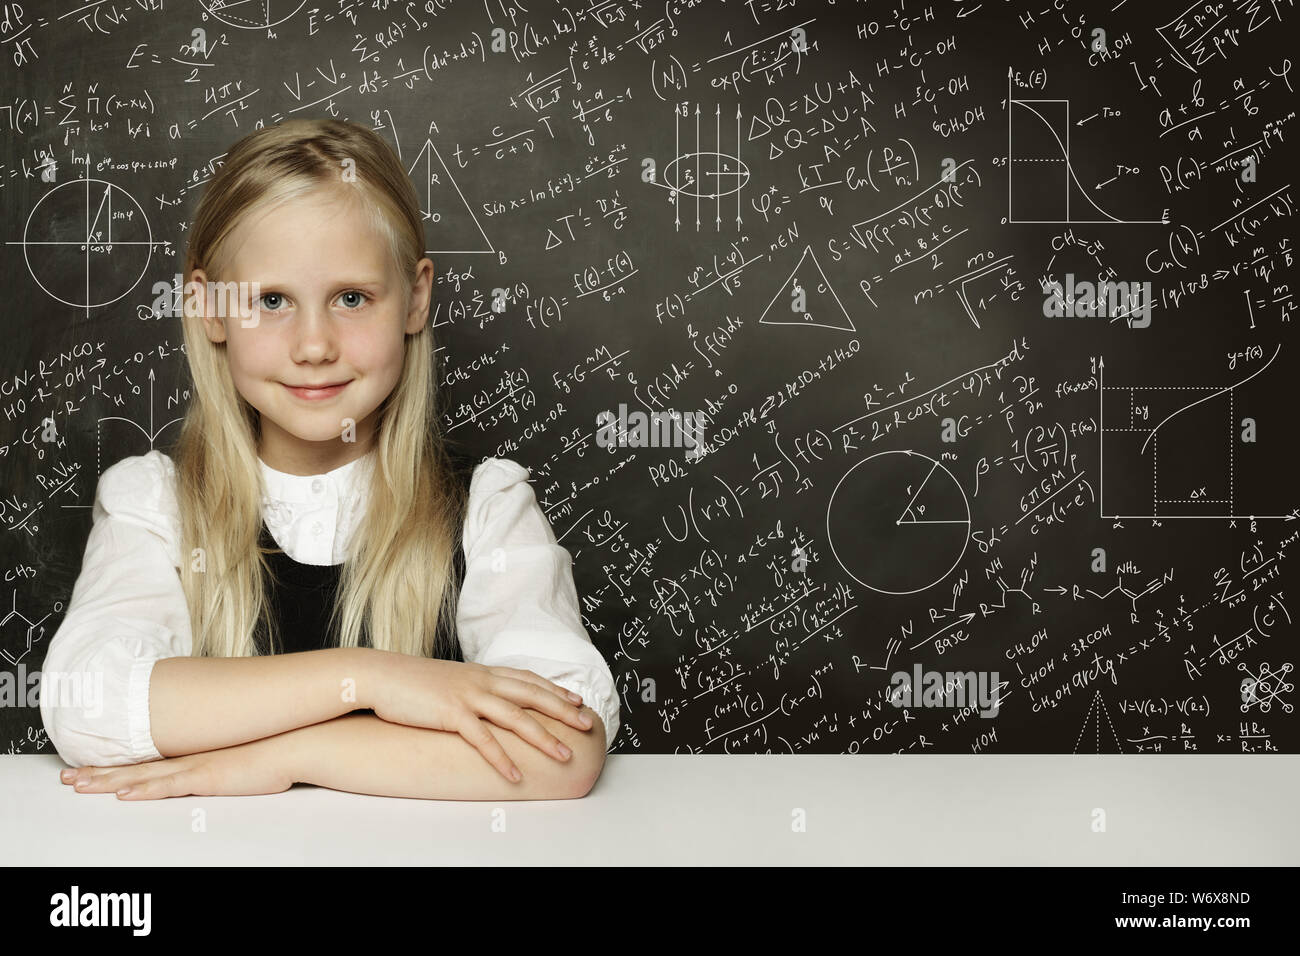 Cute smart child student girl on blackboard background with science formulas. Learning science concept. Stock Photo